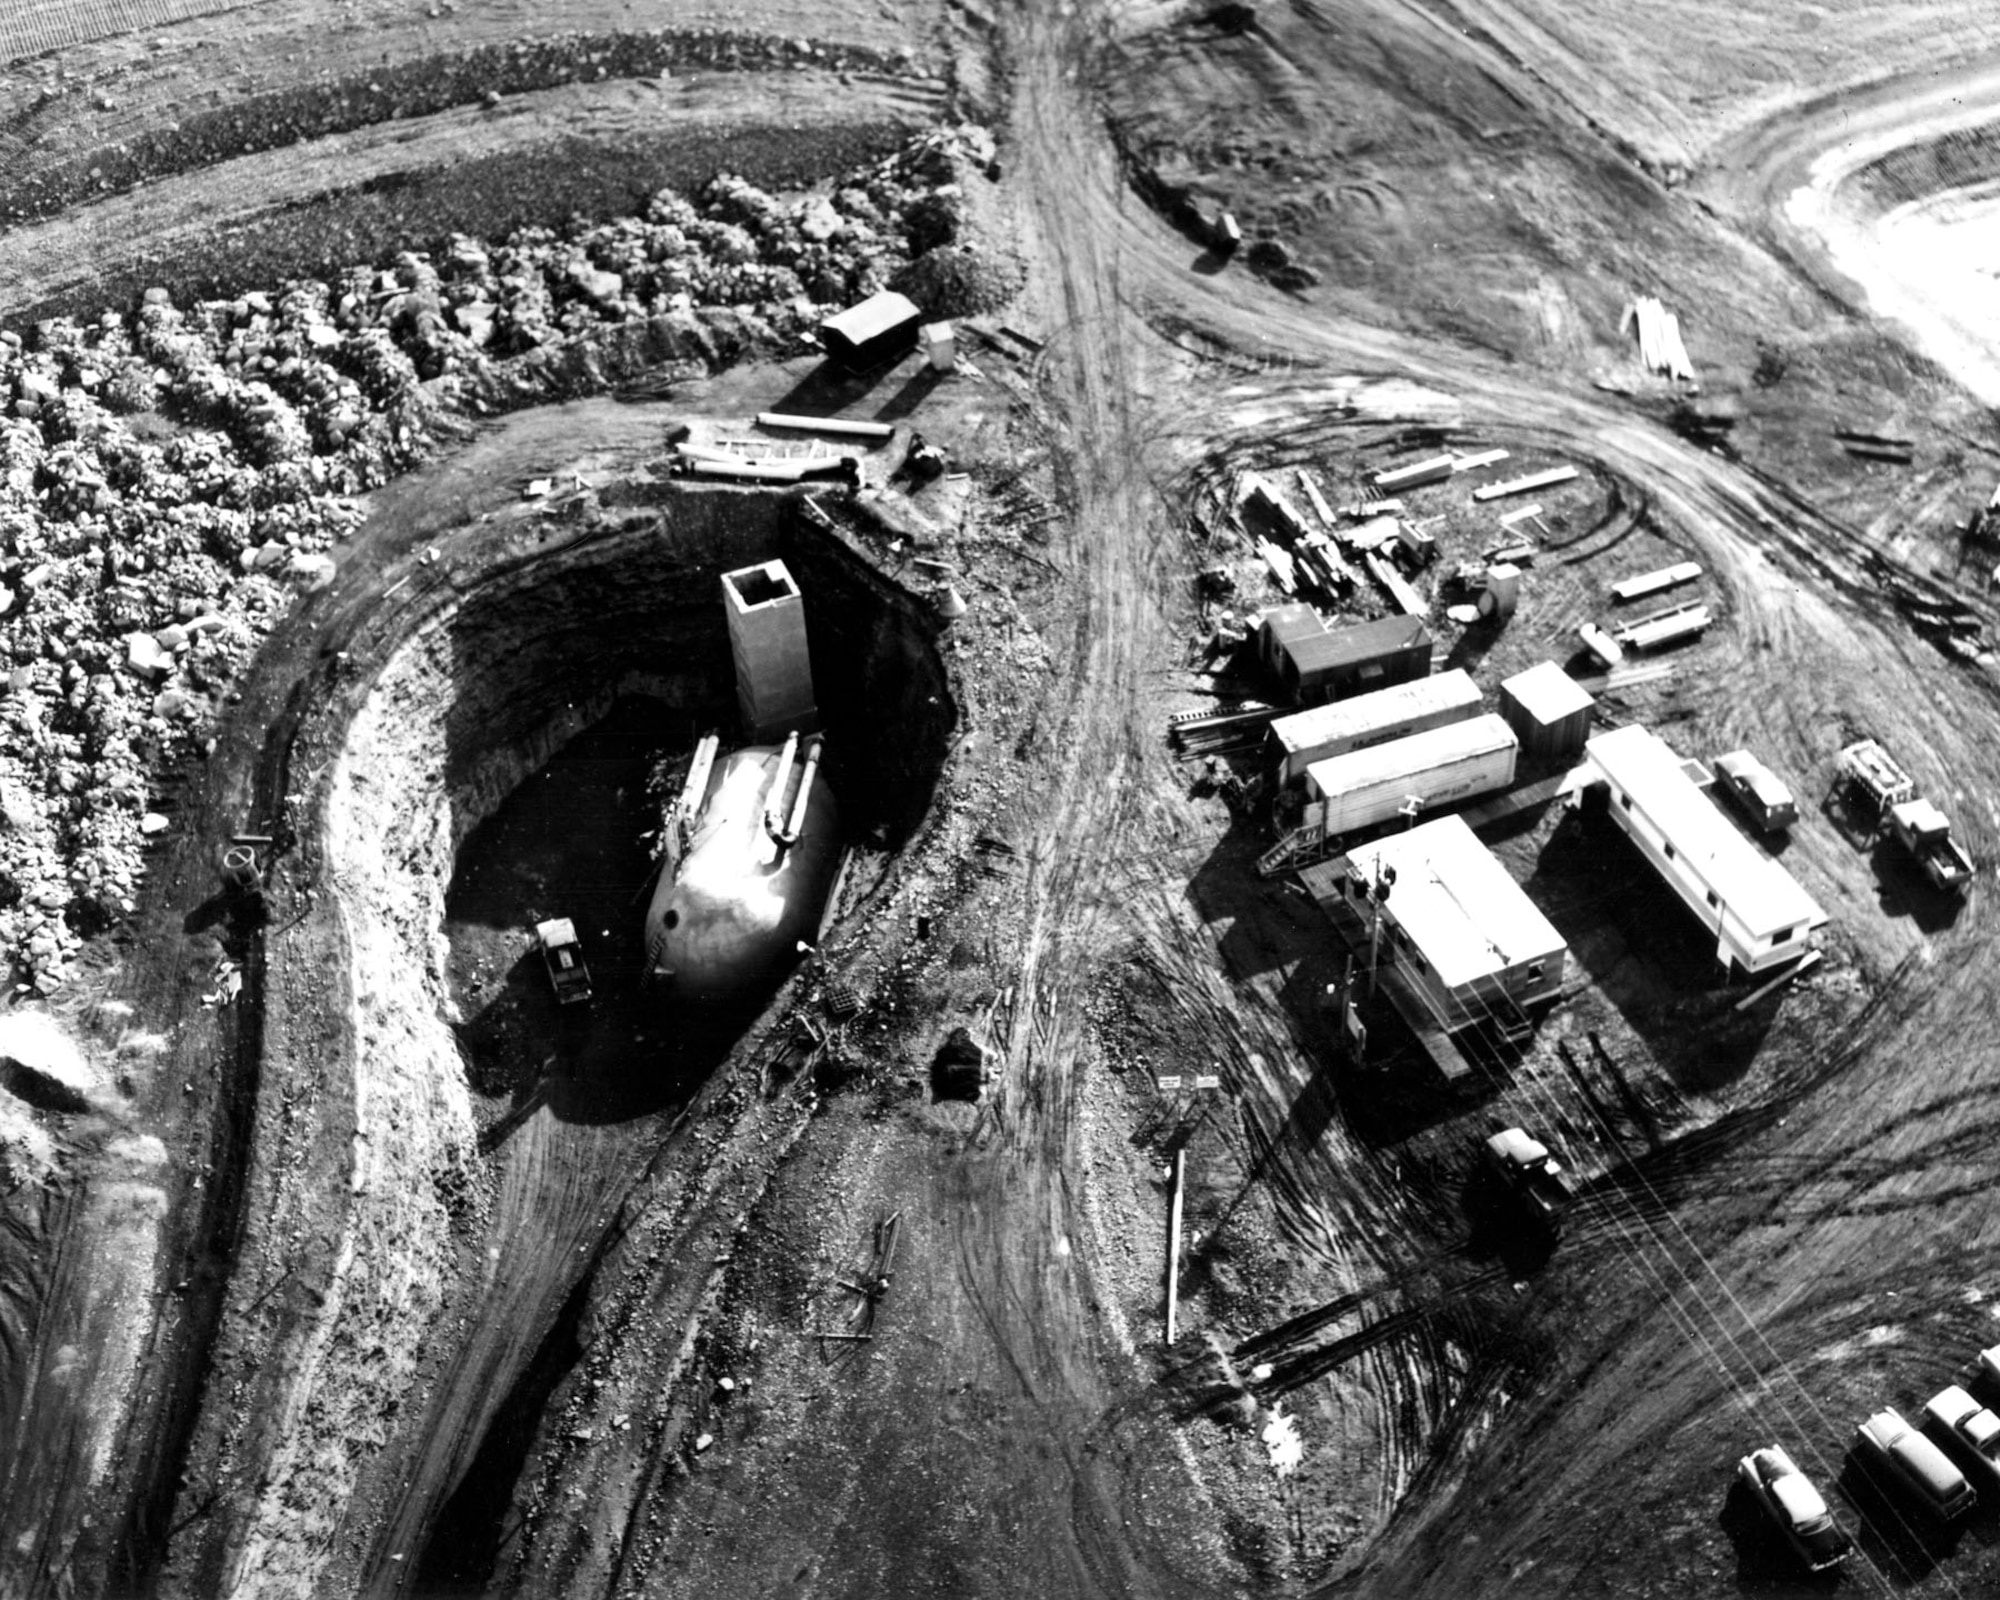 A Launch Control Facility under construction near Malmstrom AFB, Mont. Cold War requirements to build up U.S. nuclear defenses speeded up Minuteman site construction. Builders often labored year-round in three shifts, seven days a week. The Army Corps of Engineers Ballistic Missile Construction Office and its contractors built 1,000 silos between 1961 and 1966. (U.S. Air Force photo)